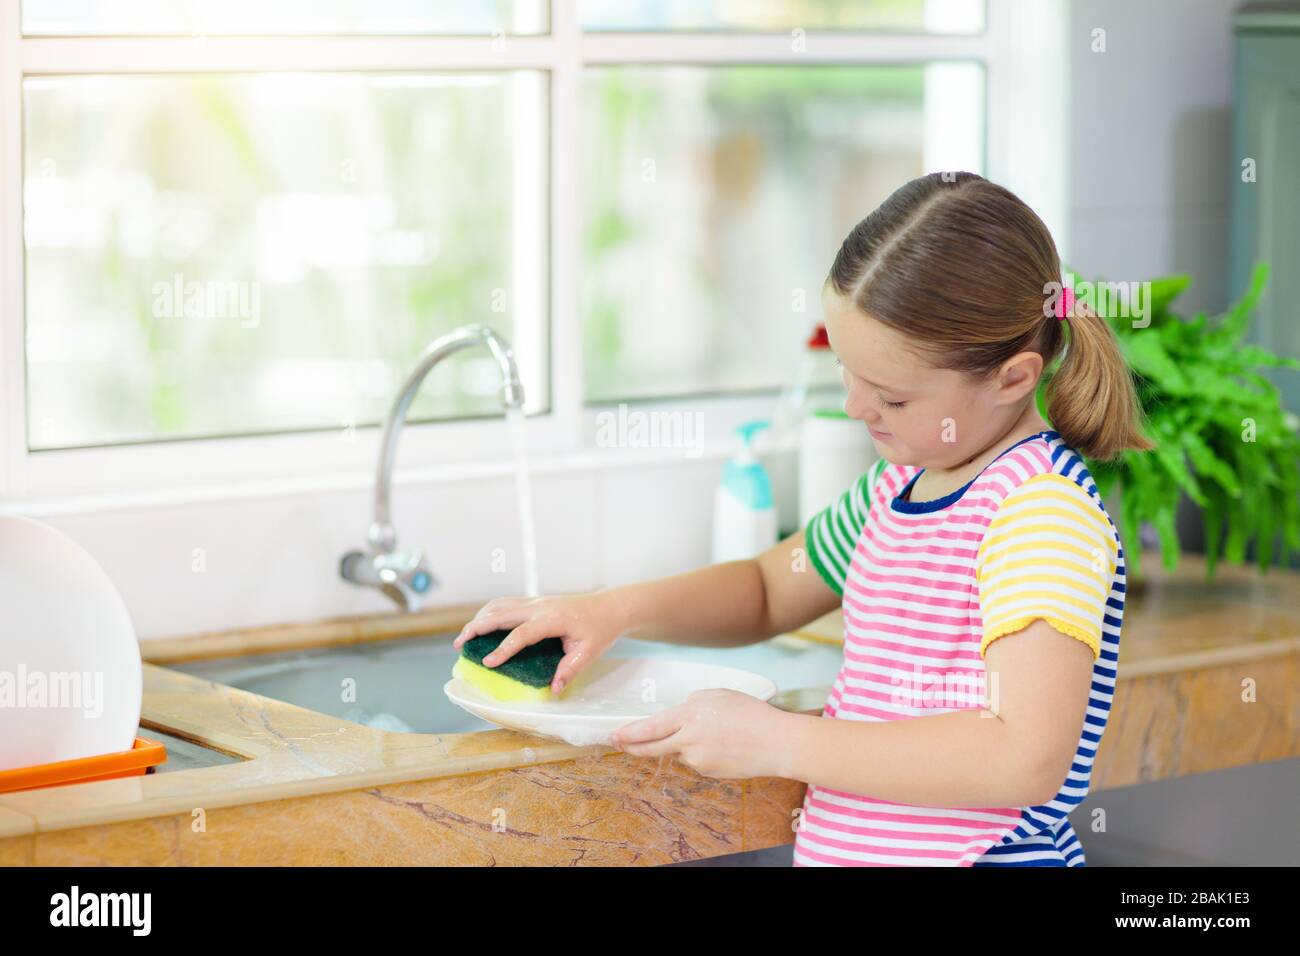 Child washing dishes. Home chores. Kid in white kitchen cleaning plates after lunch at window. Stock Photo